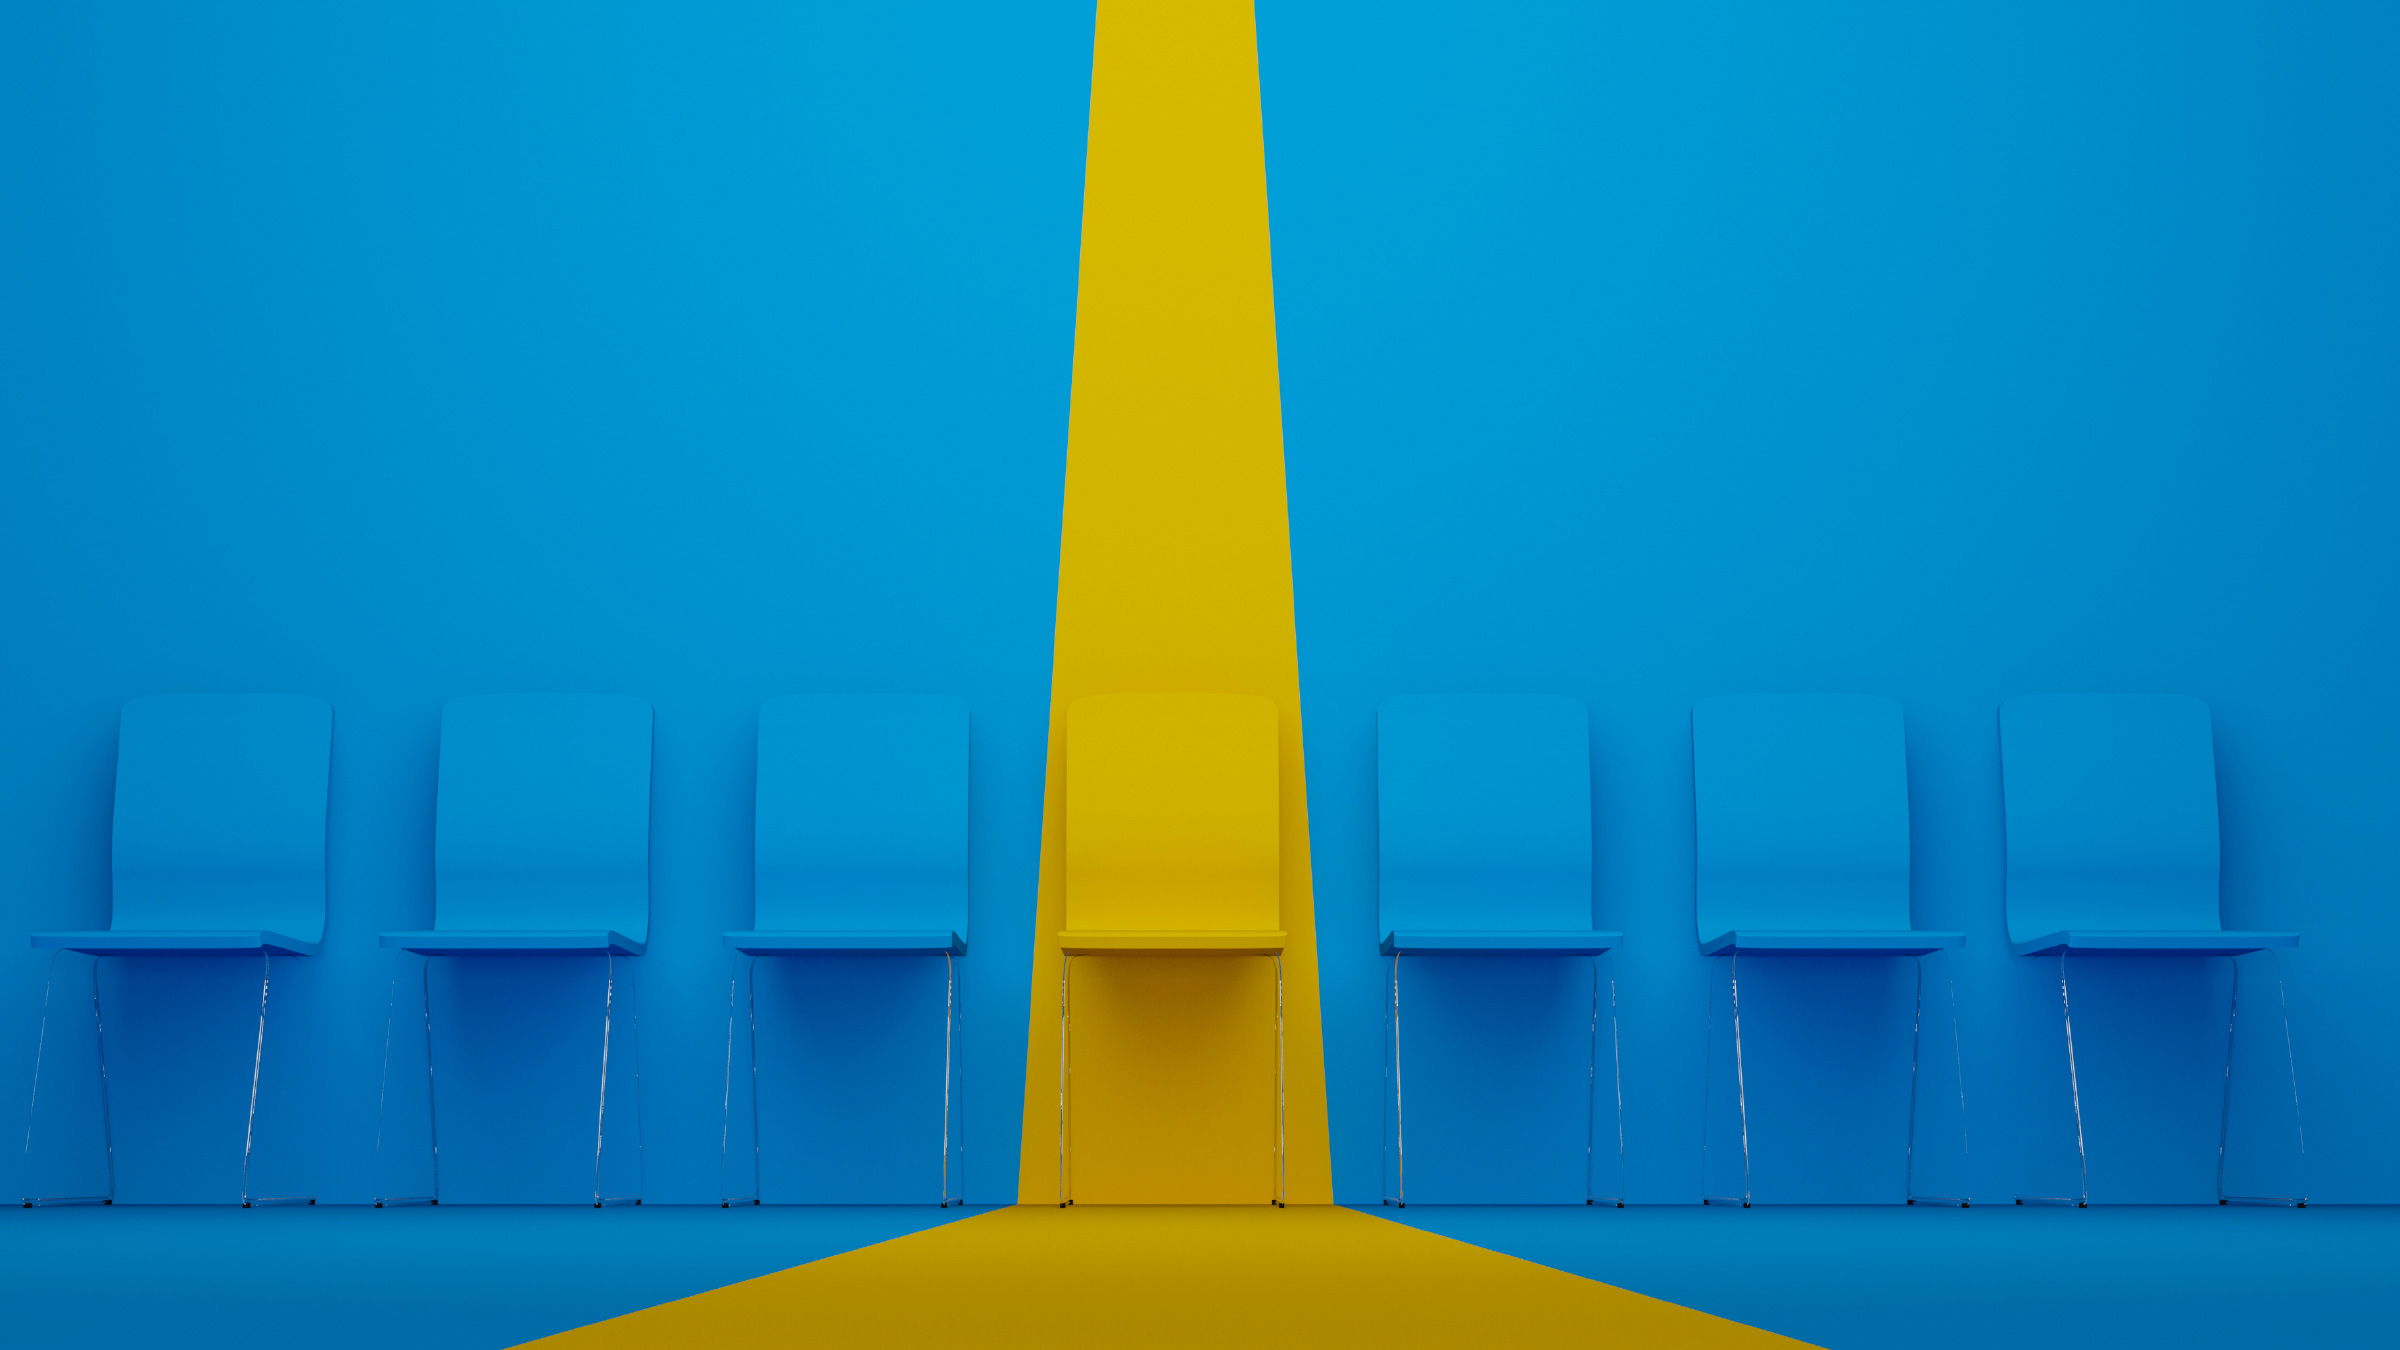 Blue chairs against a blue wall with one yellow chair highlighted